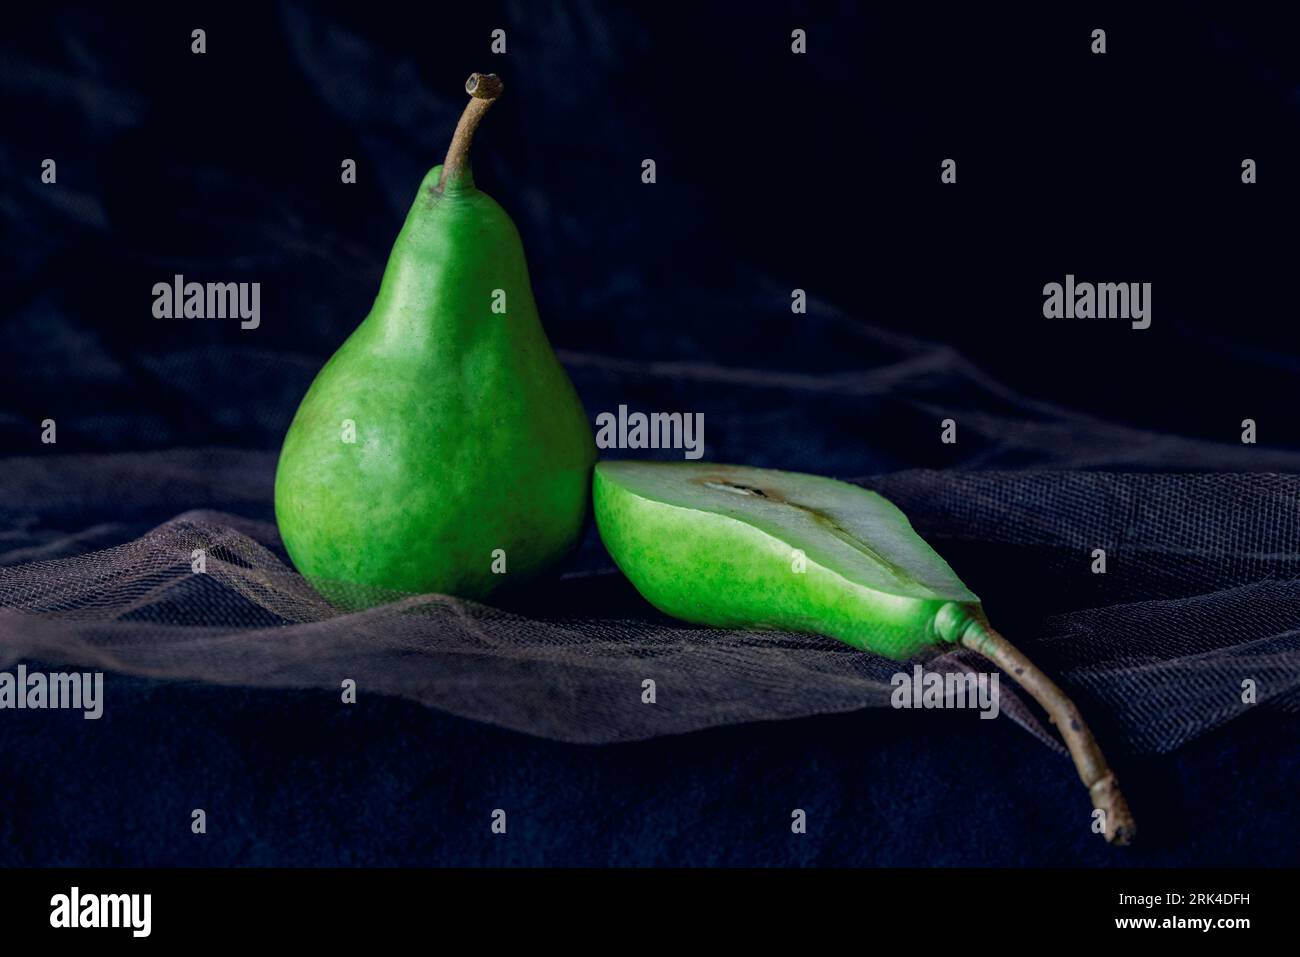 Green pears with vintage concept on a black background, close up, macro photography Stock Photo